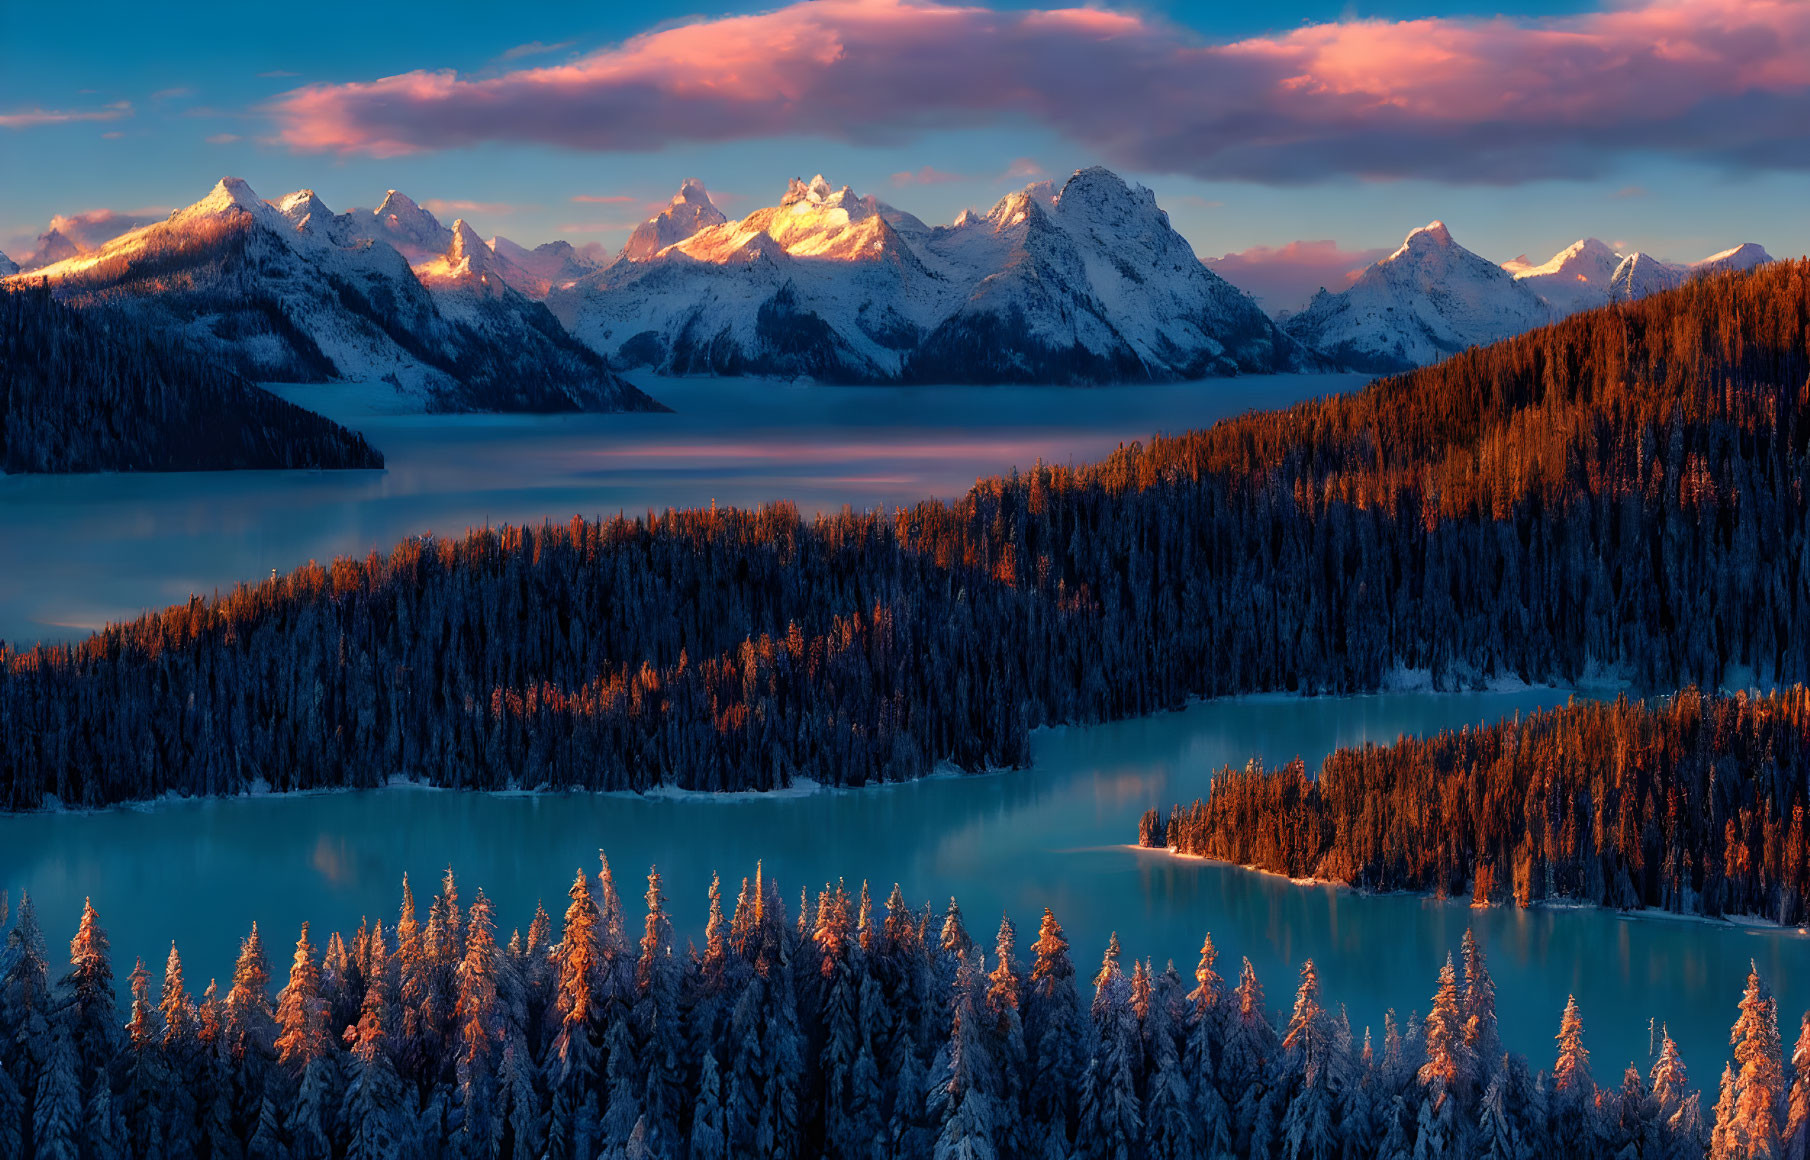 Snow-Capped Mountains at Sunset with Forest, Lake Reflection